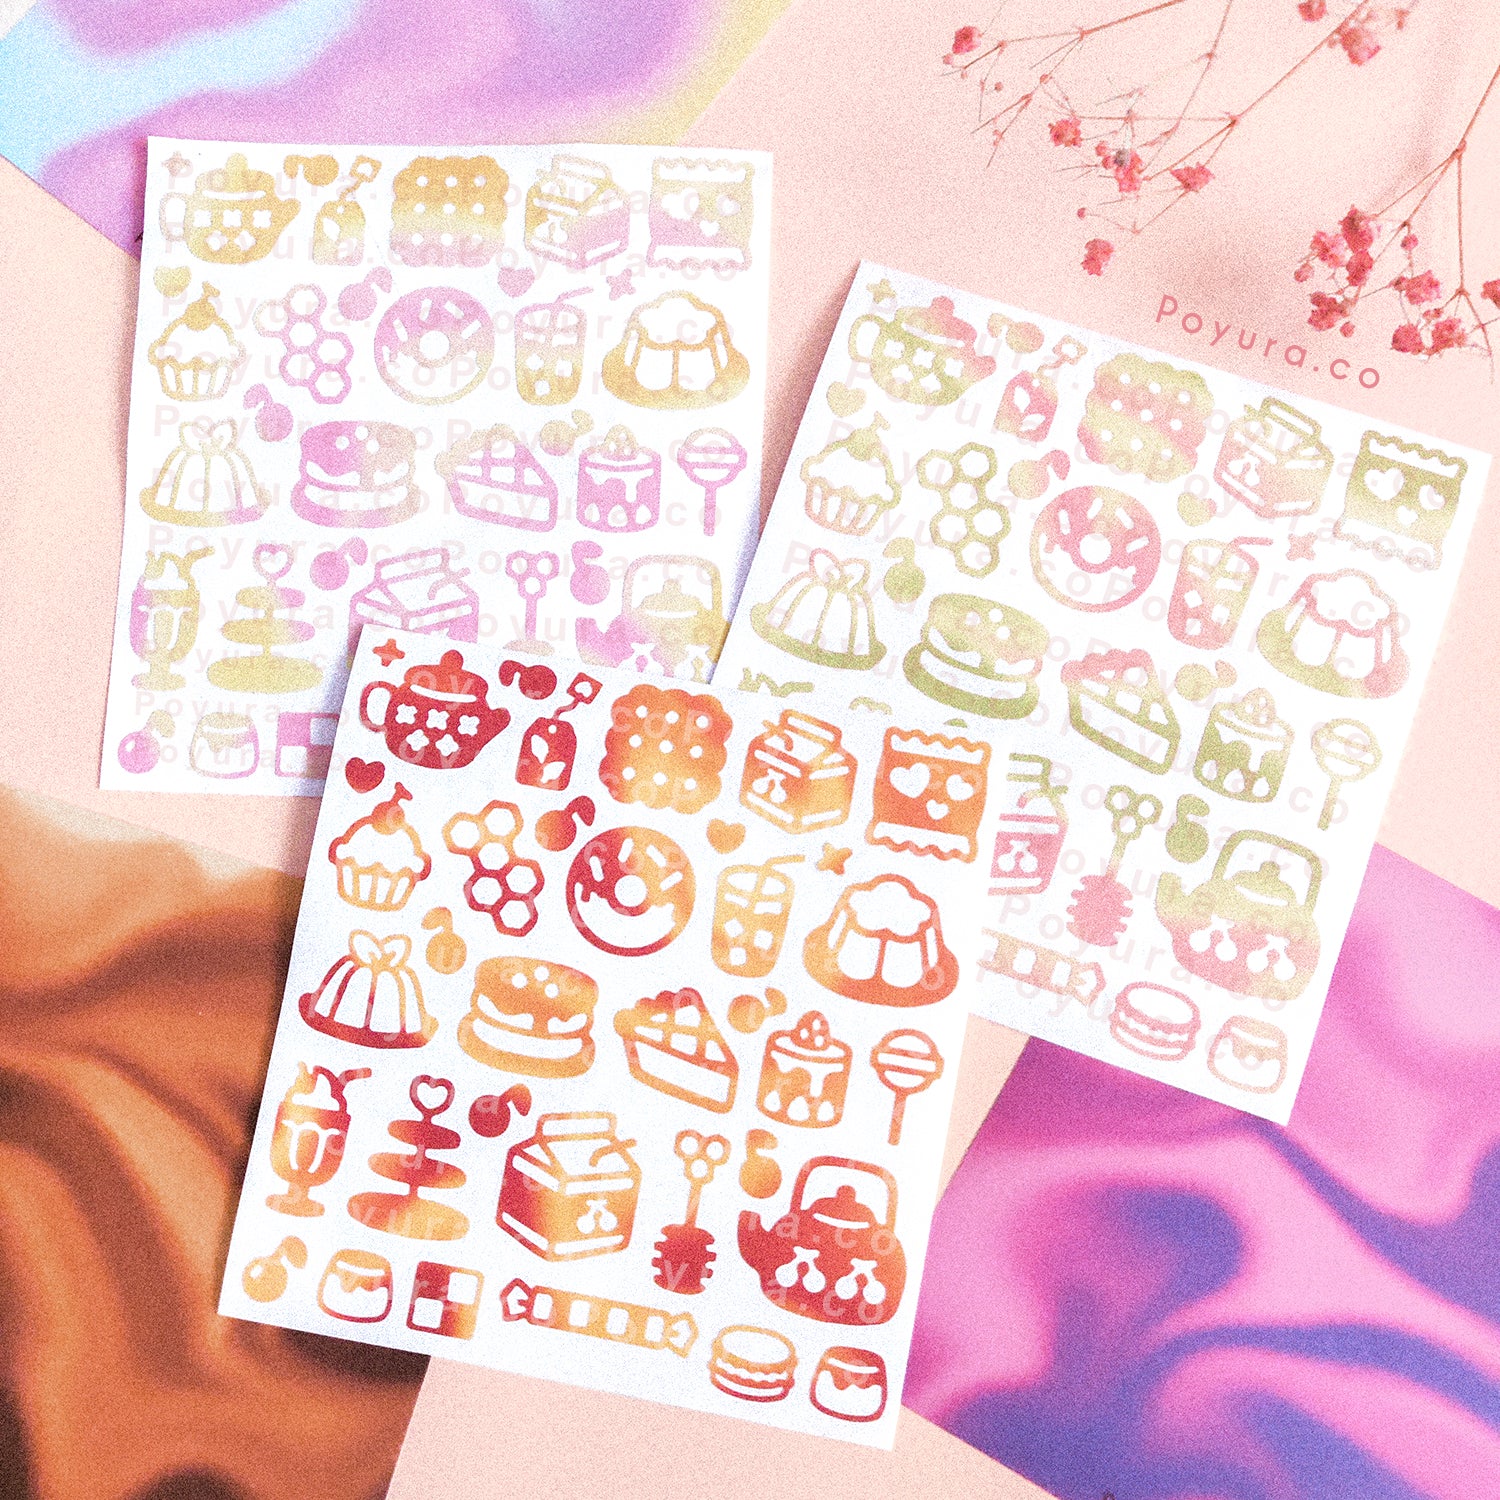 High tea deco tiny small filler star sparkle donut cherry fruit candy bag pudding honey pancake waffle lolly cakestand muffin cupcake milkbottle milkbox macaron cookie snack bubble tea boba selflove sweets food drink cake cafe tea teapot tealeaves aesthetic cute polco deco kpop journal toploader sticker sheet